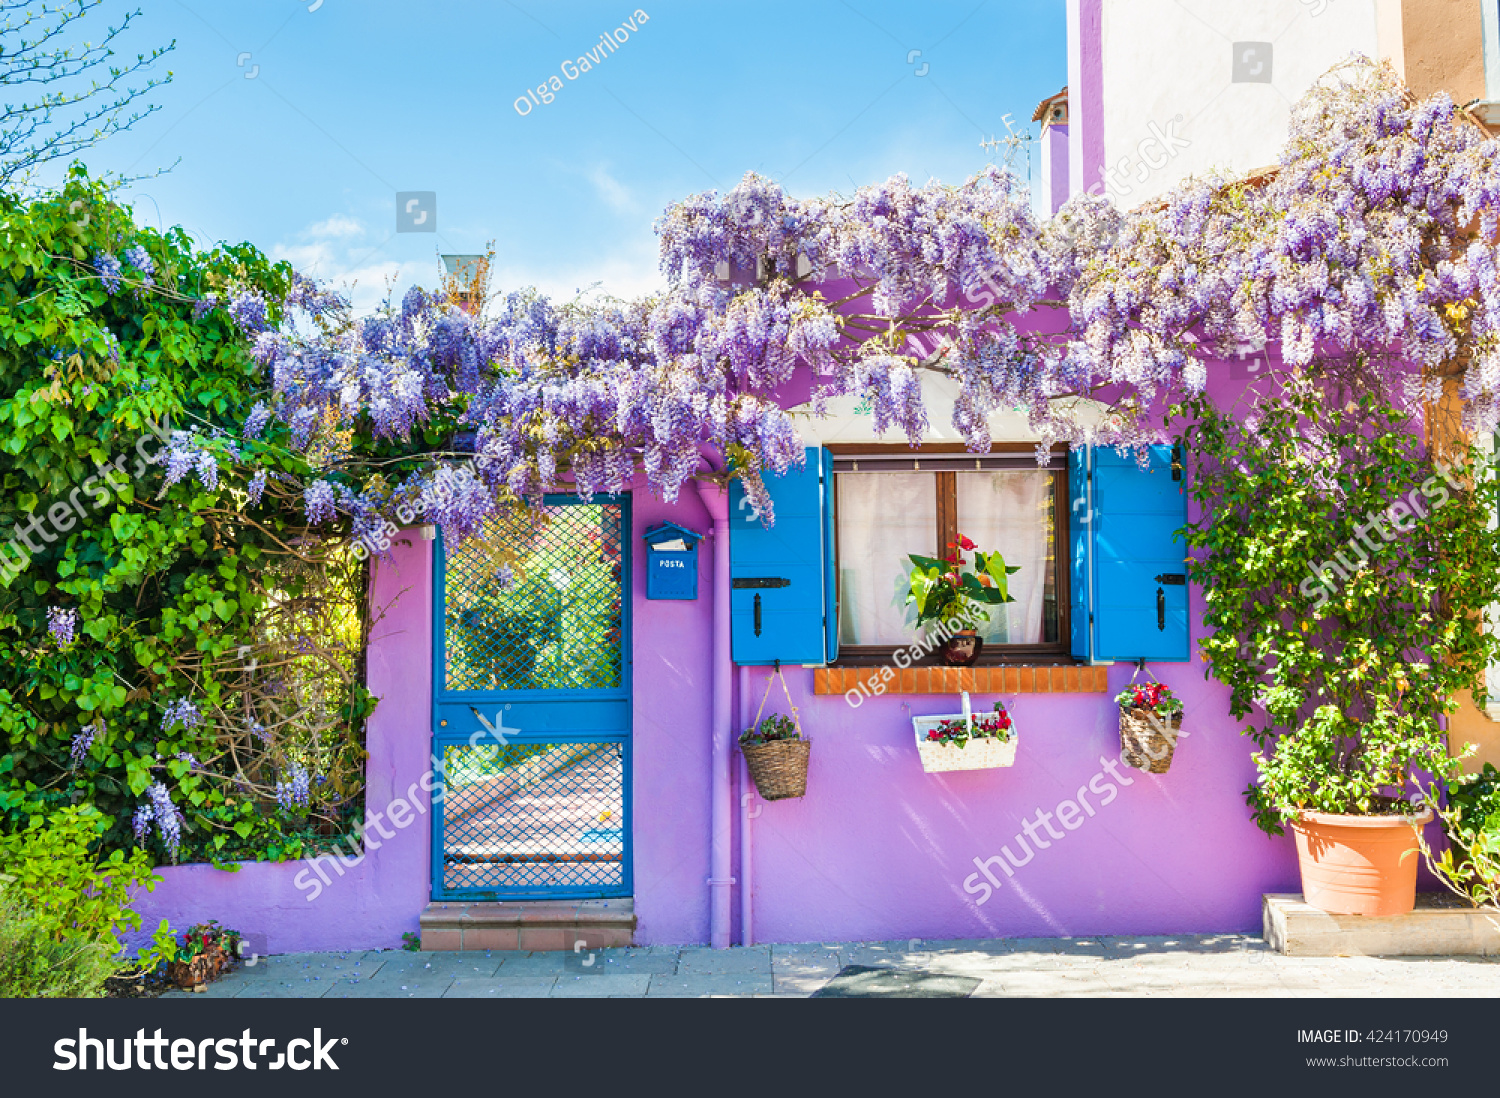 Violet house with violet flowers. Colorful houses in Burano island near Venice, Italy #424170949